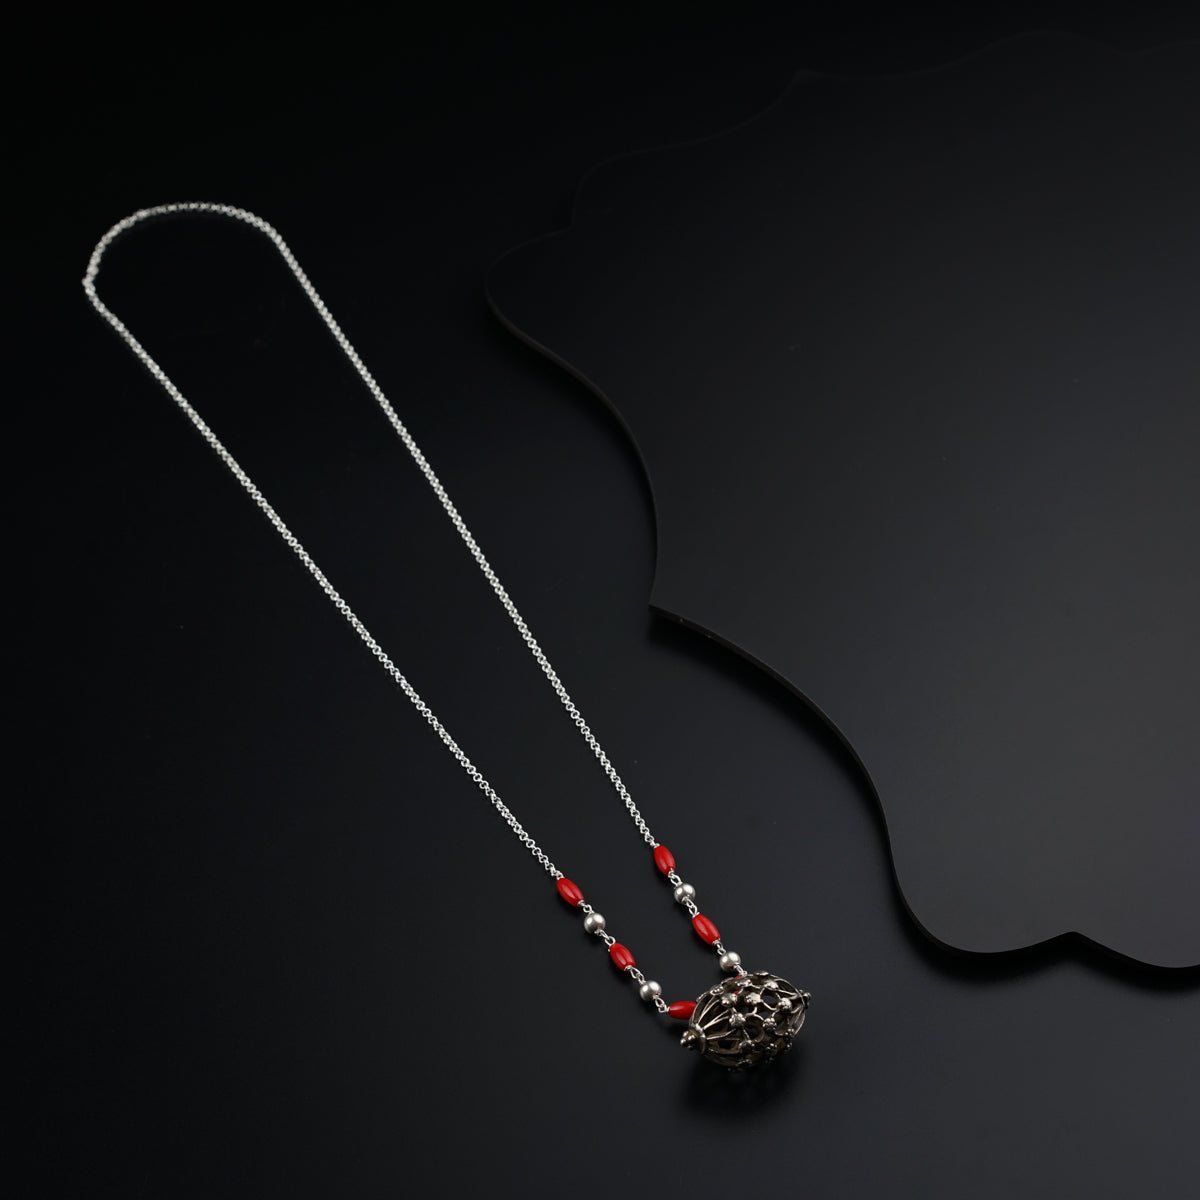 two necklaces on a black surface with a black background